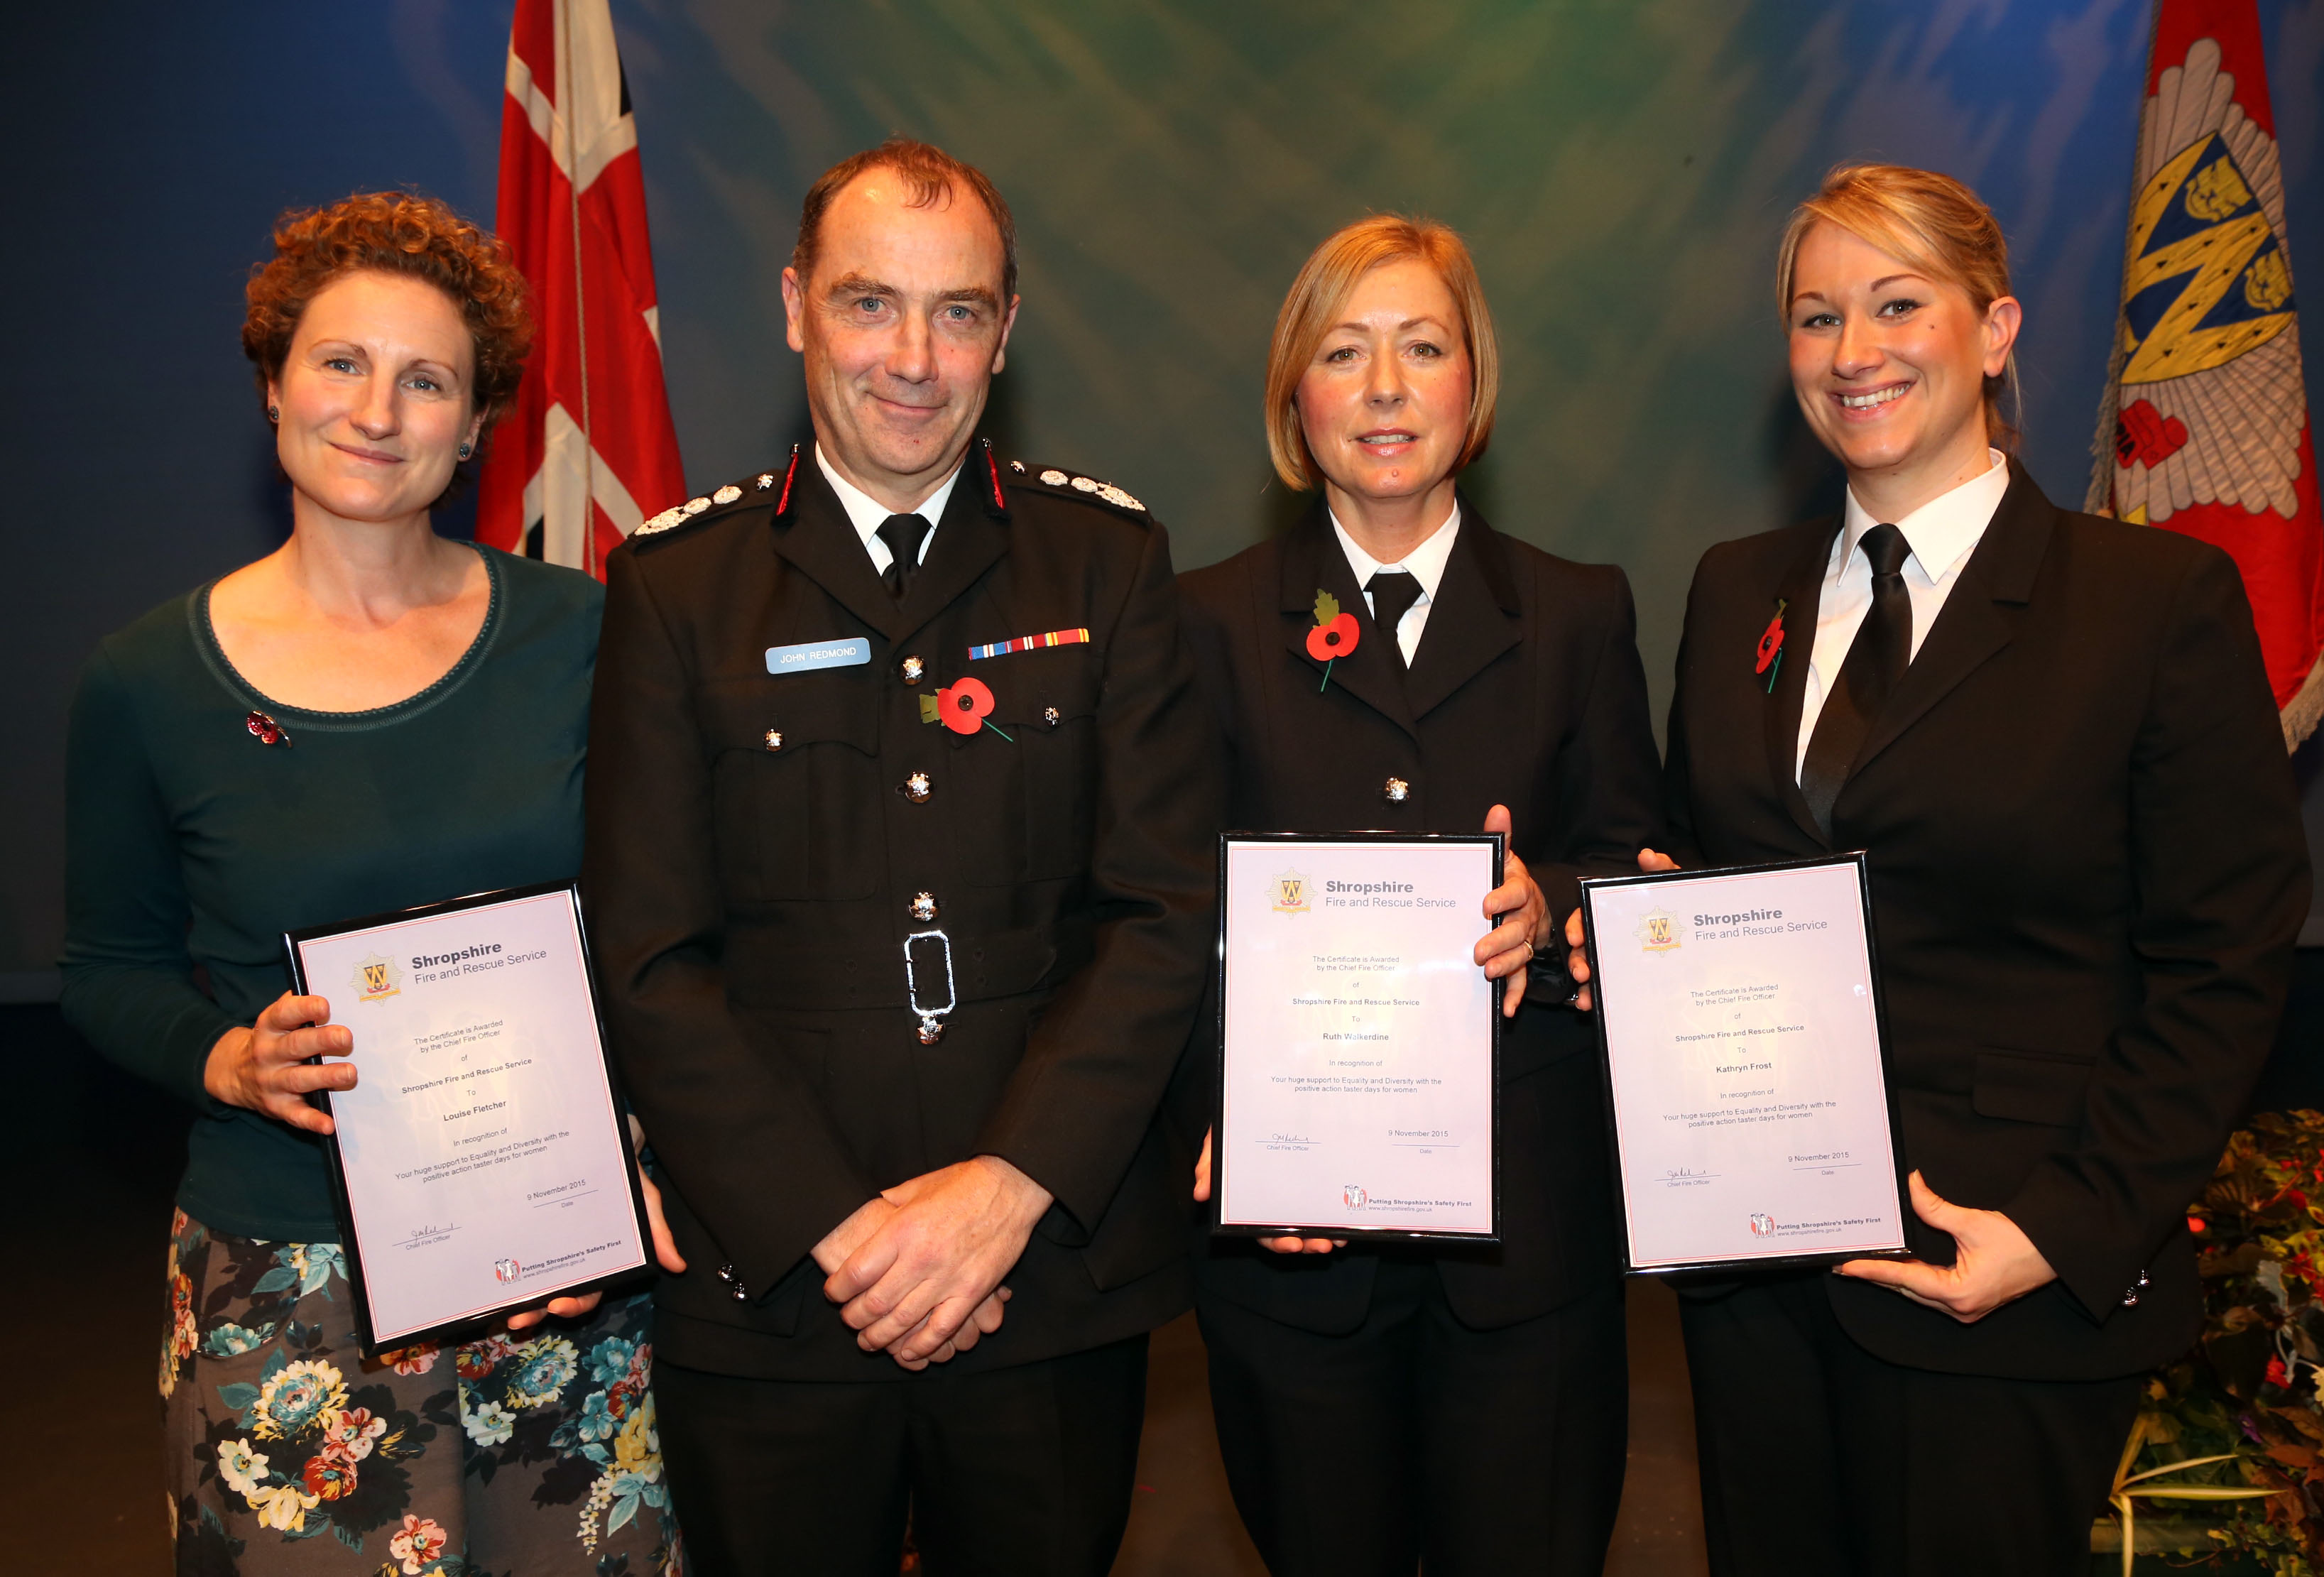 Firefighters Louise Fletcher, Ruth Walkerdine and Kat Frost encouraged more women to become firefighters